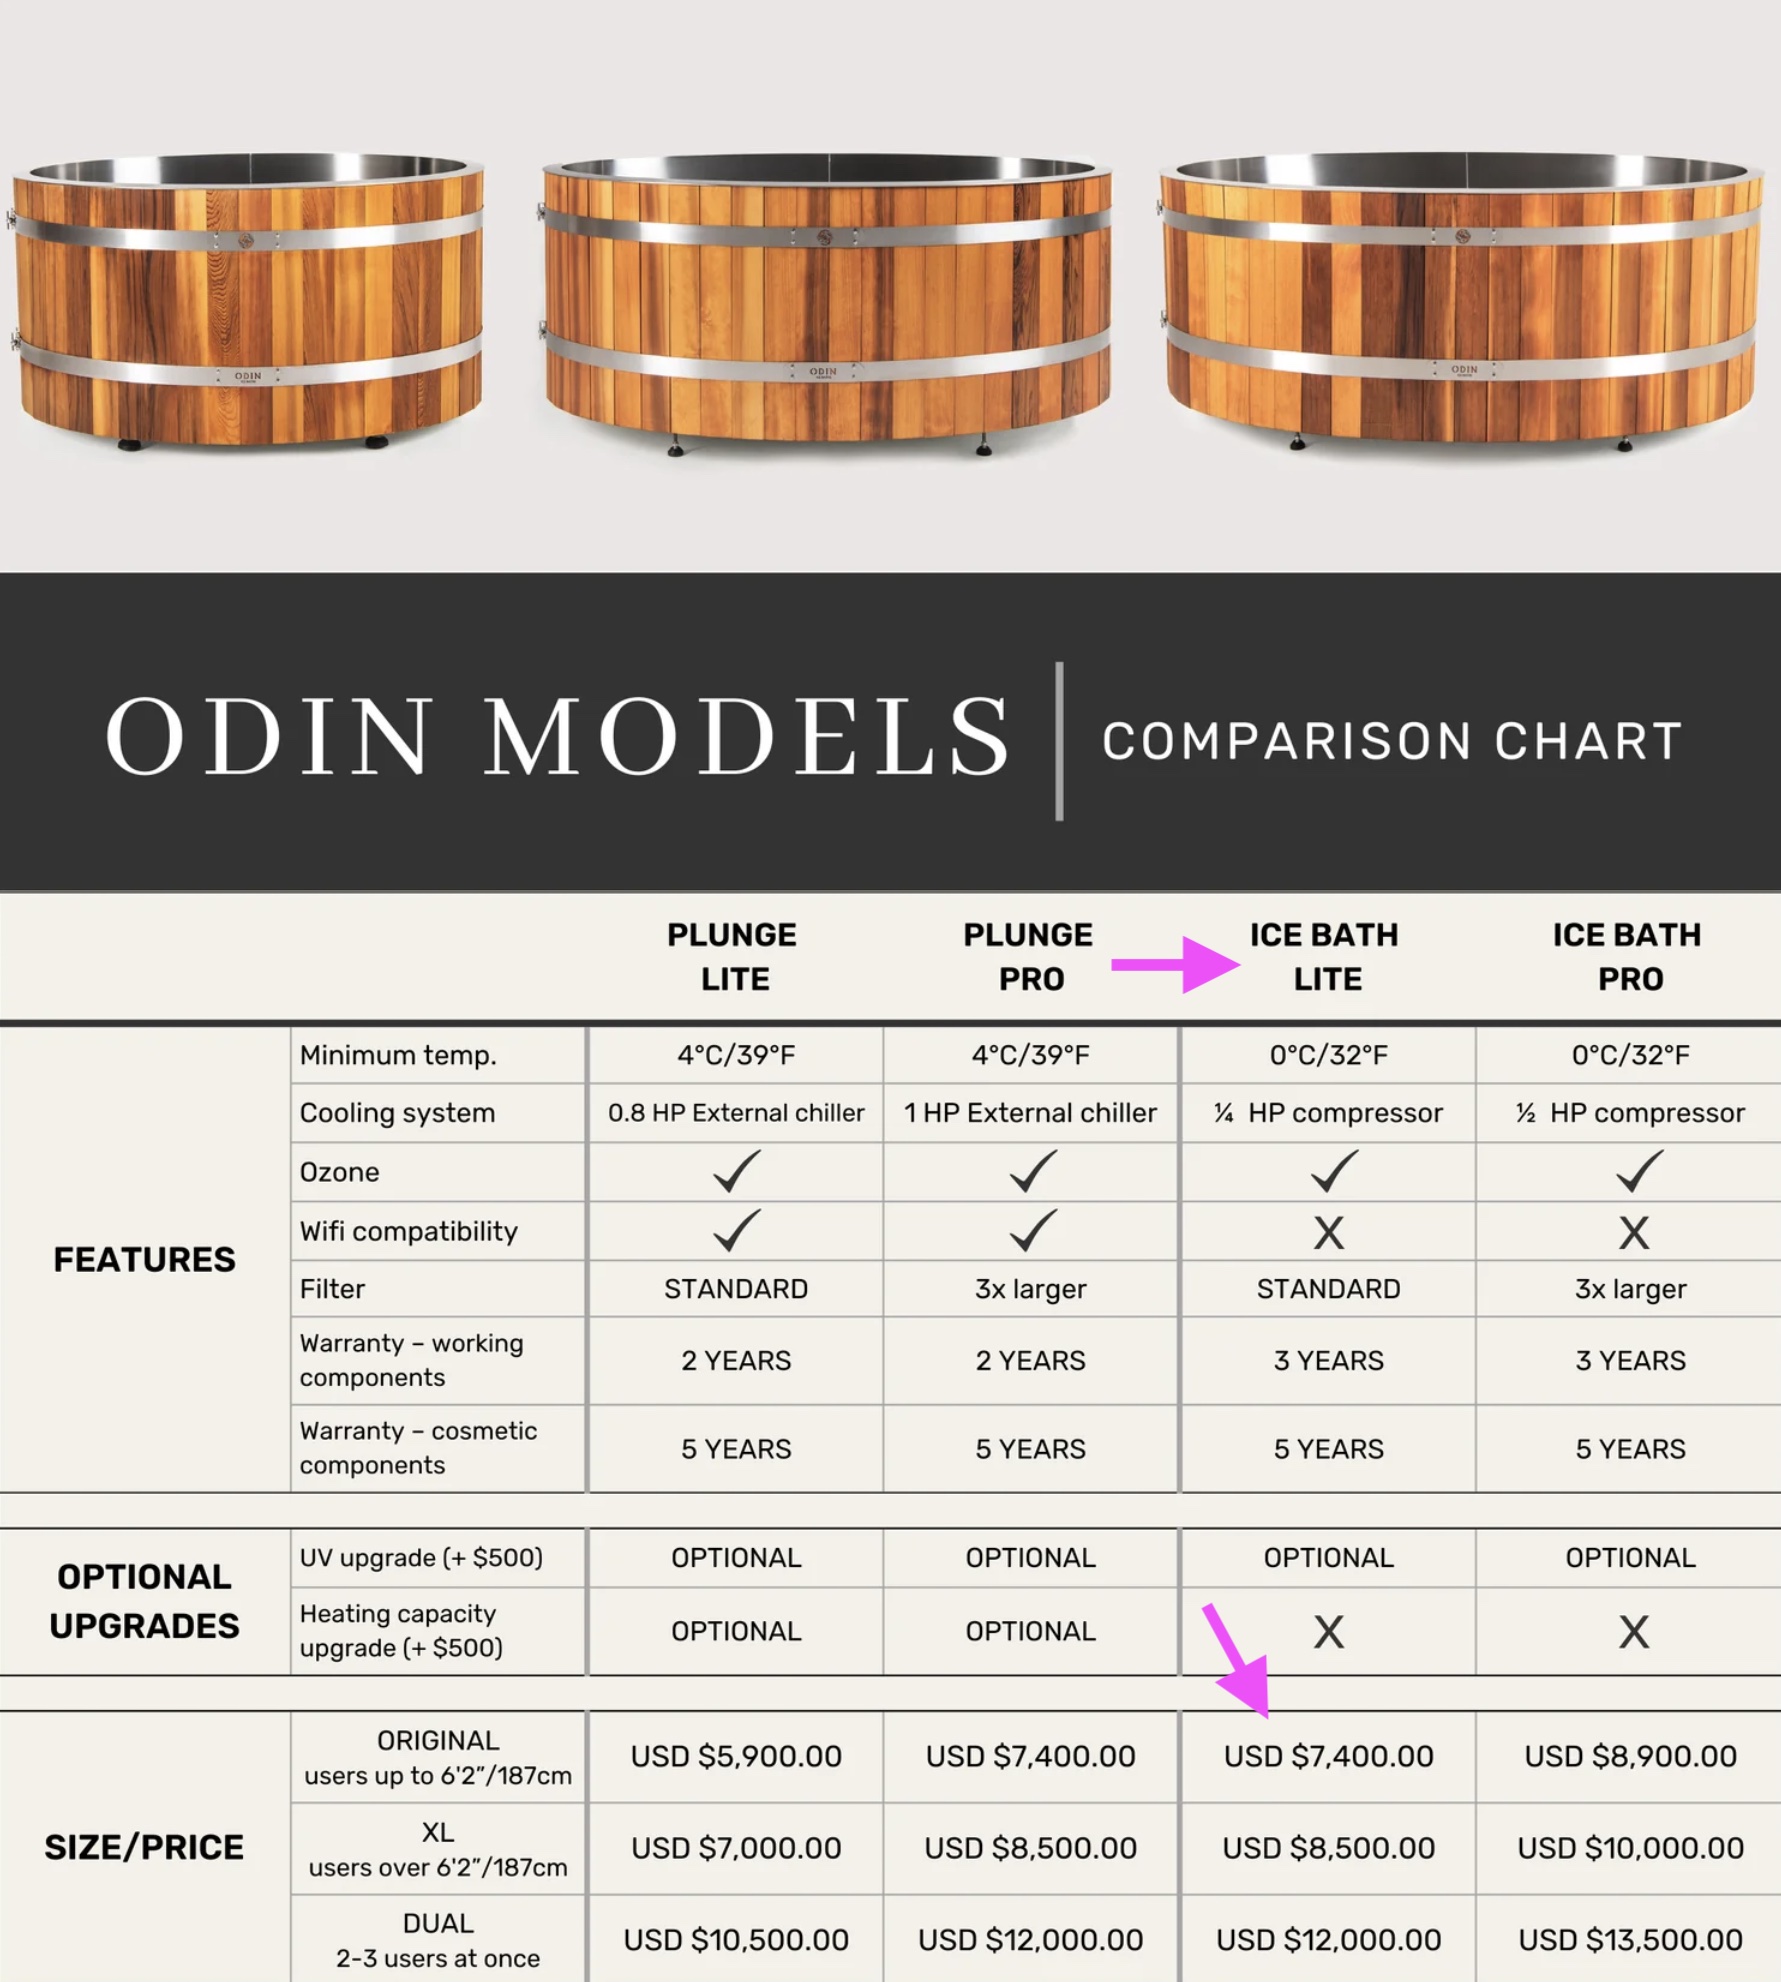 Review Odin ice bath prices and models